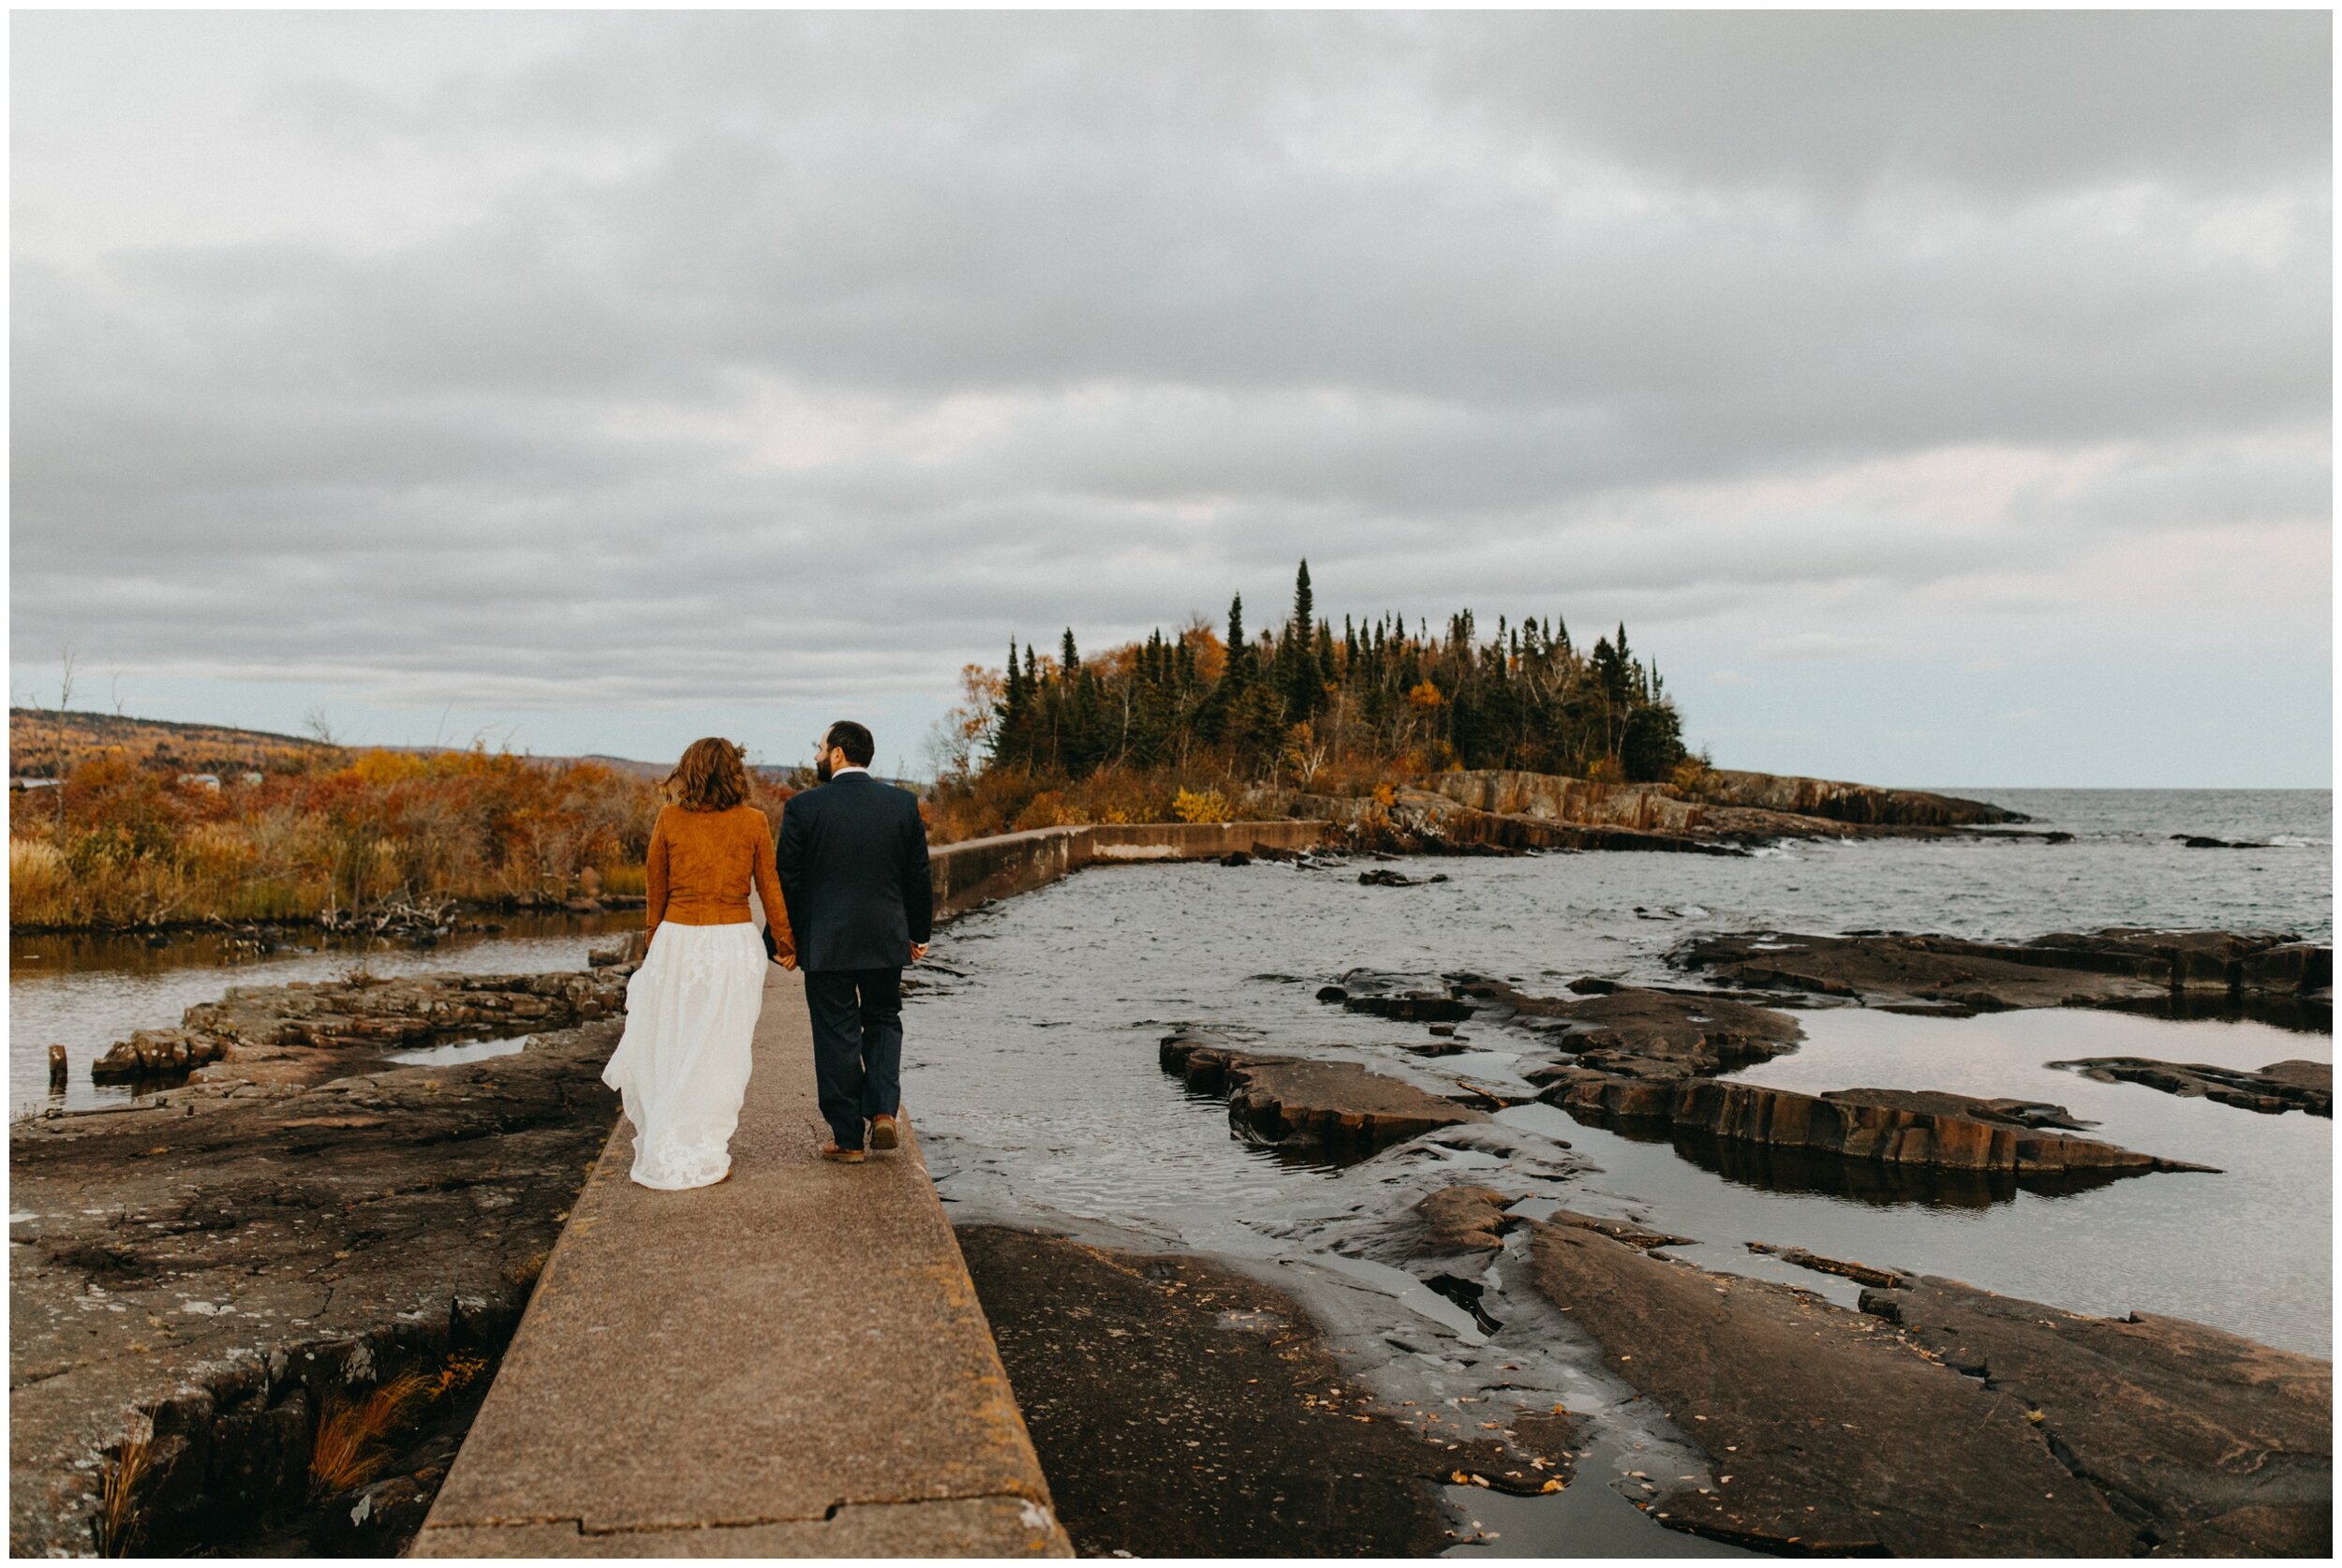 Bride and groom walking on Artists' Point boardwalk after fall wedding in Grand Marais, MN